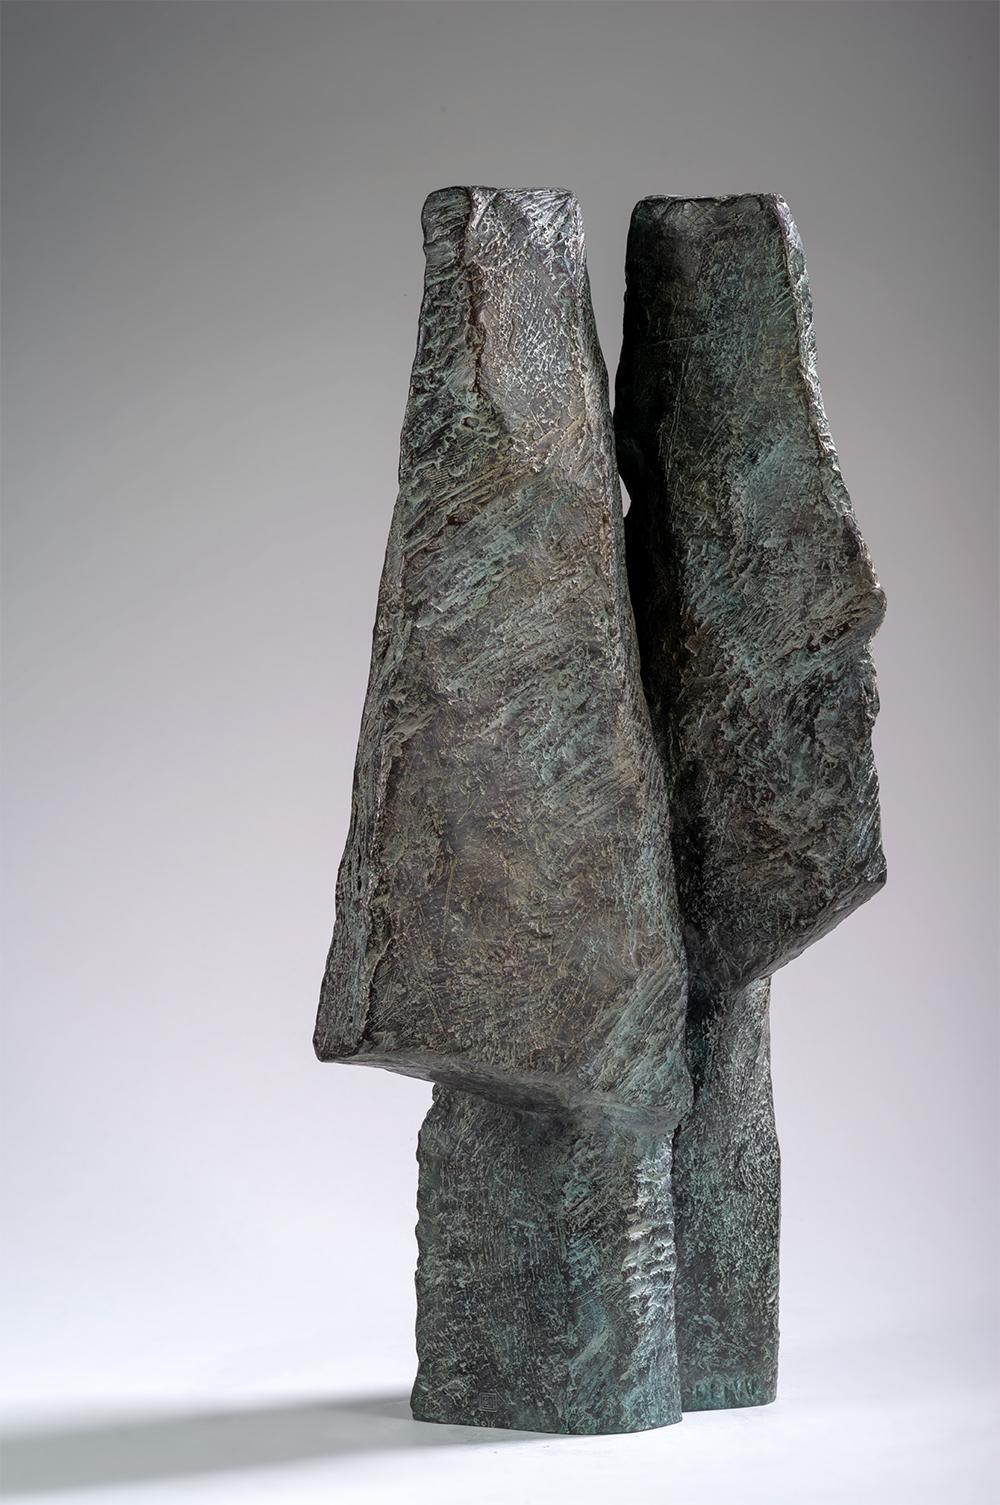 Janus Heads is a bronze sculpture by French contemporary artist Martine Demal, dimensions are 54 × 26 × 17 cm (21.3 × 10.2 × 6.7 in). 
The sculpture is signed and numbered, it is part of a limited edition of 8 editions + 4 artist’s proofs, and comes